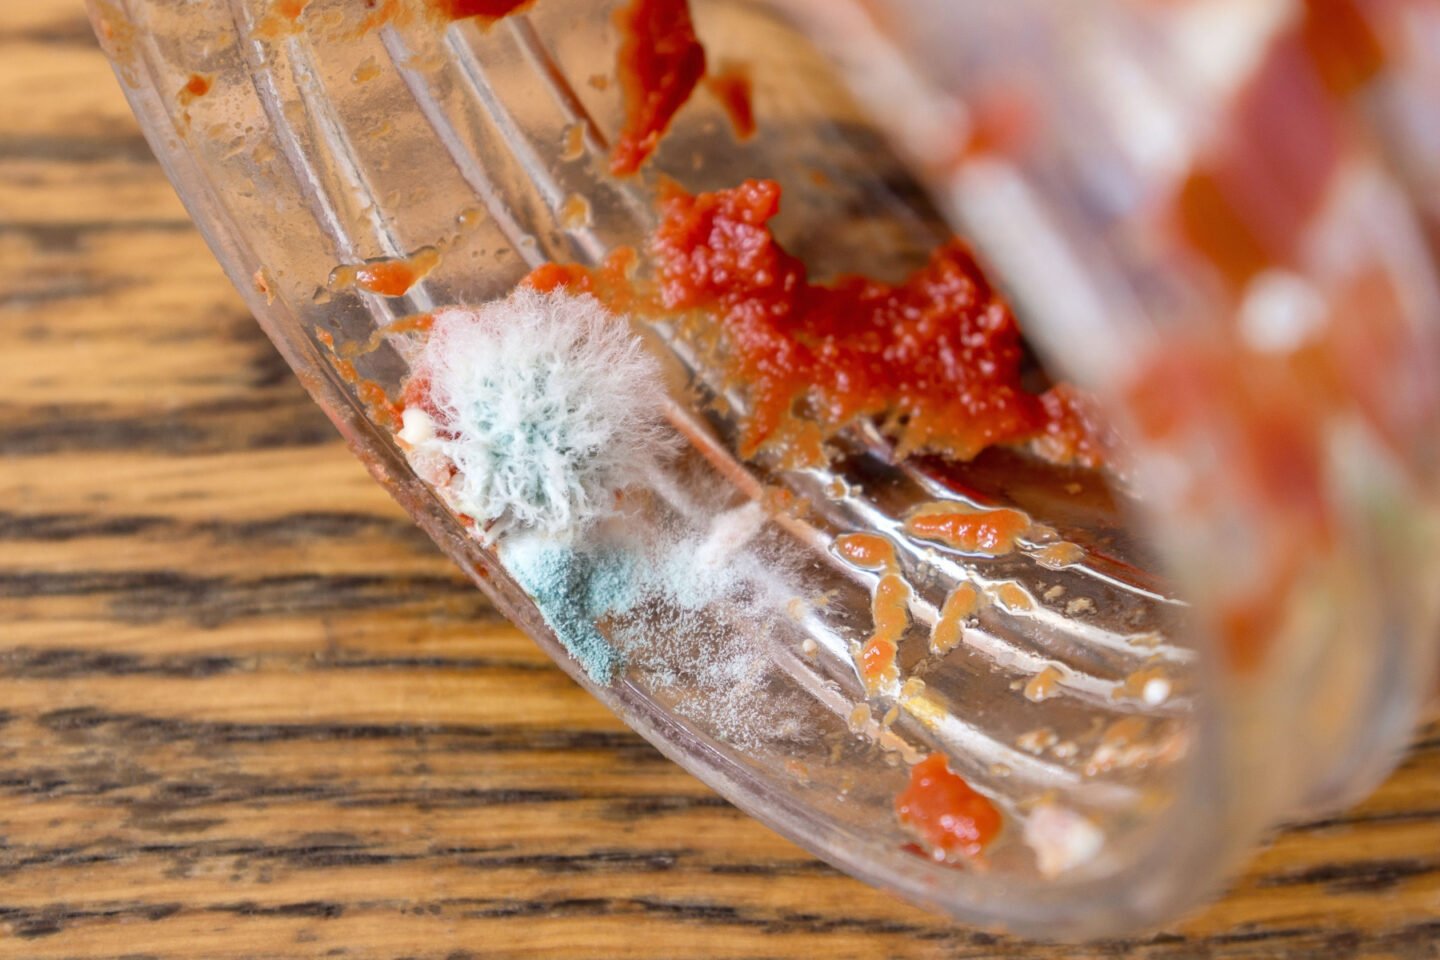 mold found in a jar of red sauce